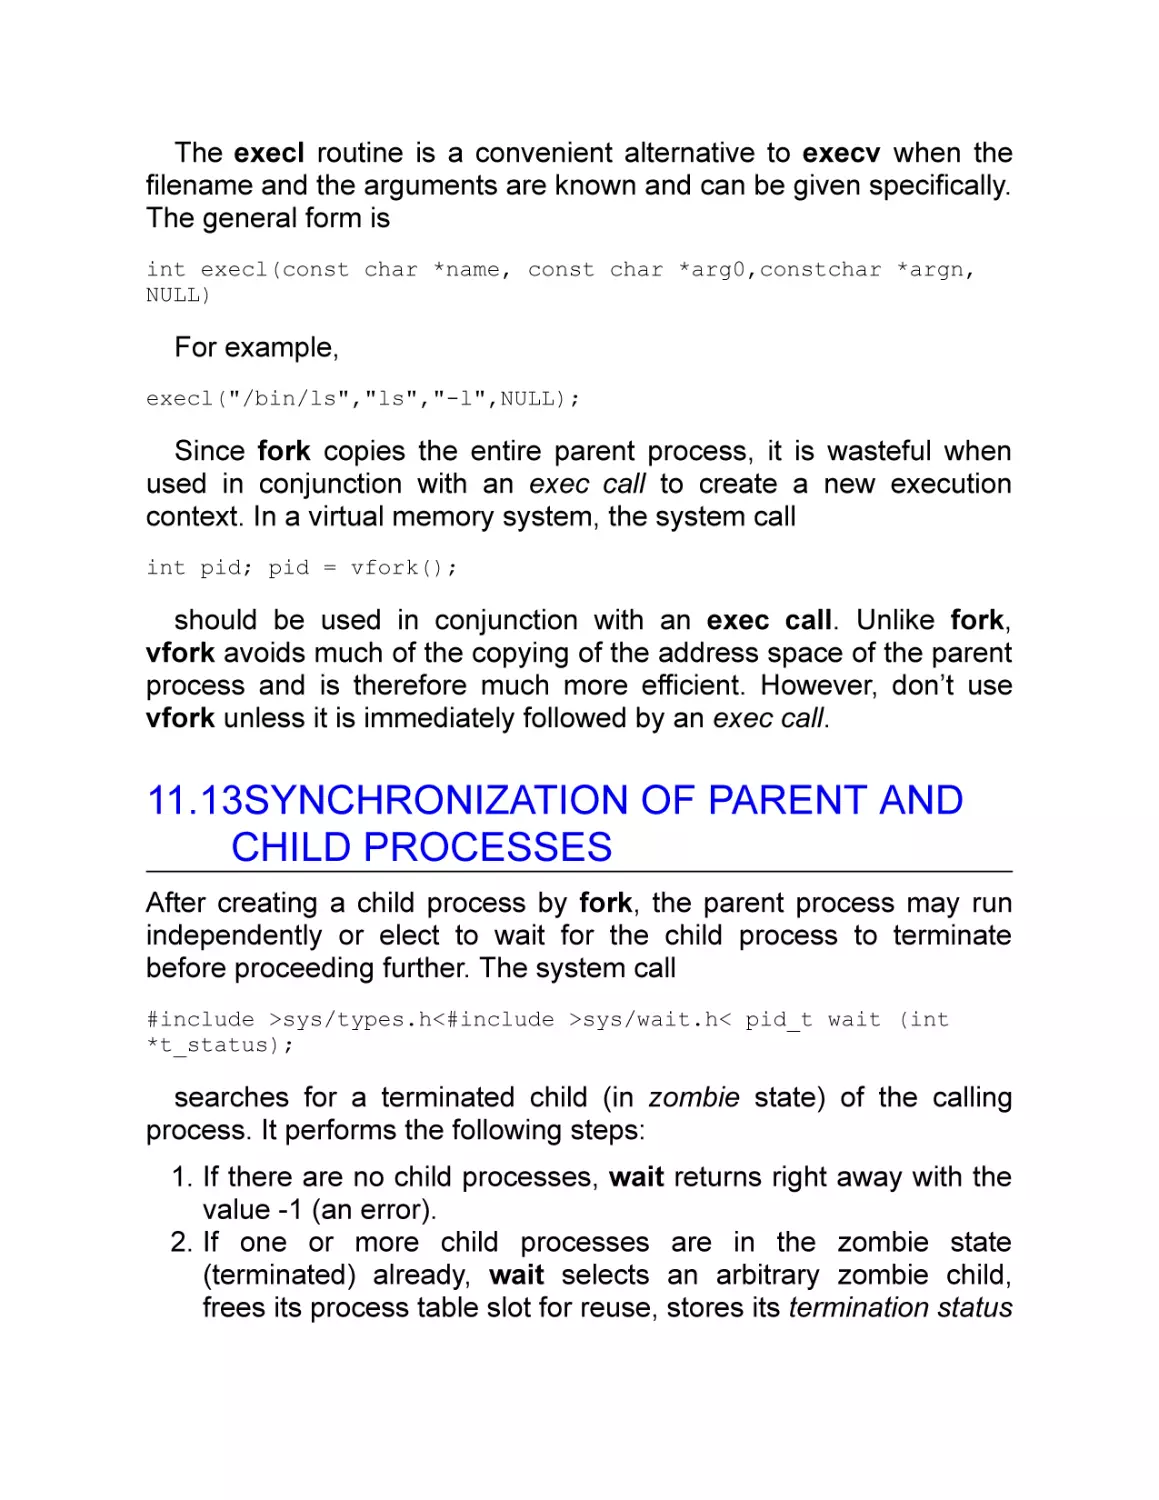 11.13 Synchronization of Parent and Child Processes